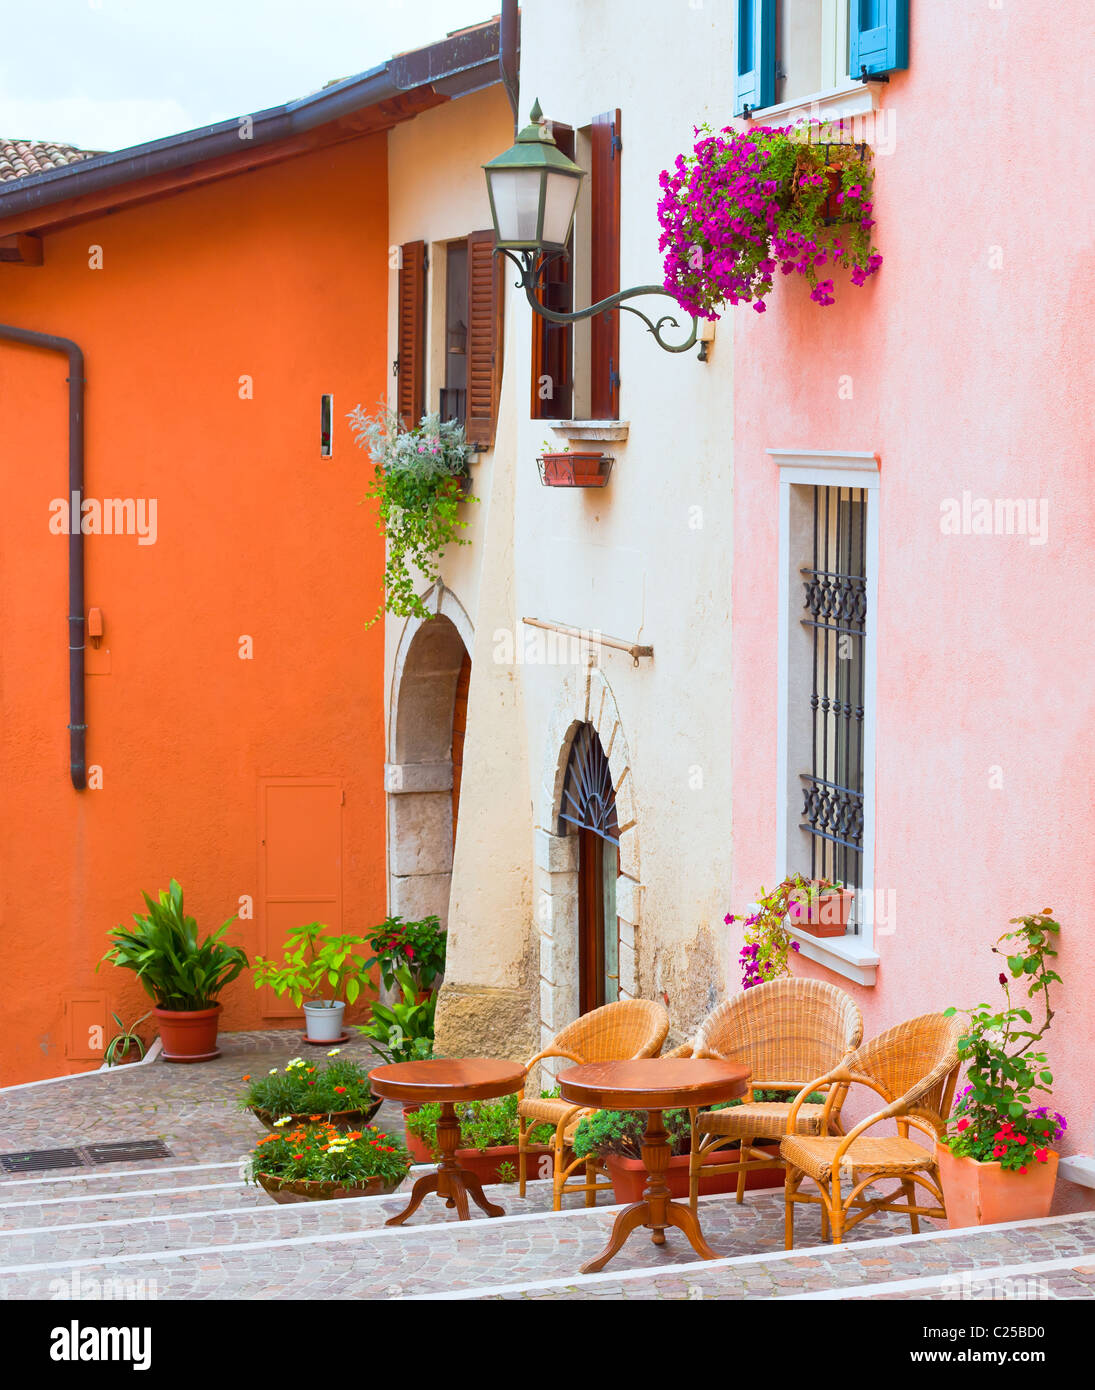 traditional italian small town street with pots of flowers and cafe Stock Photo